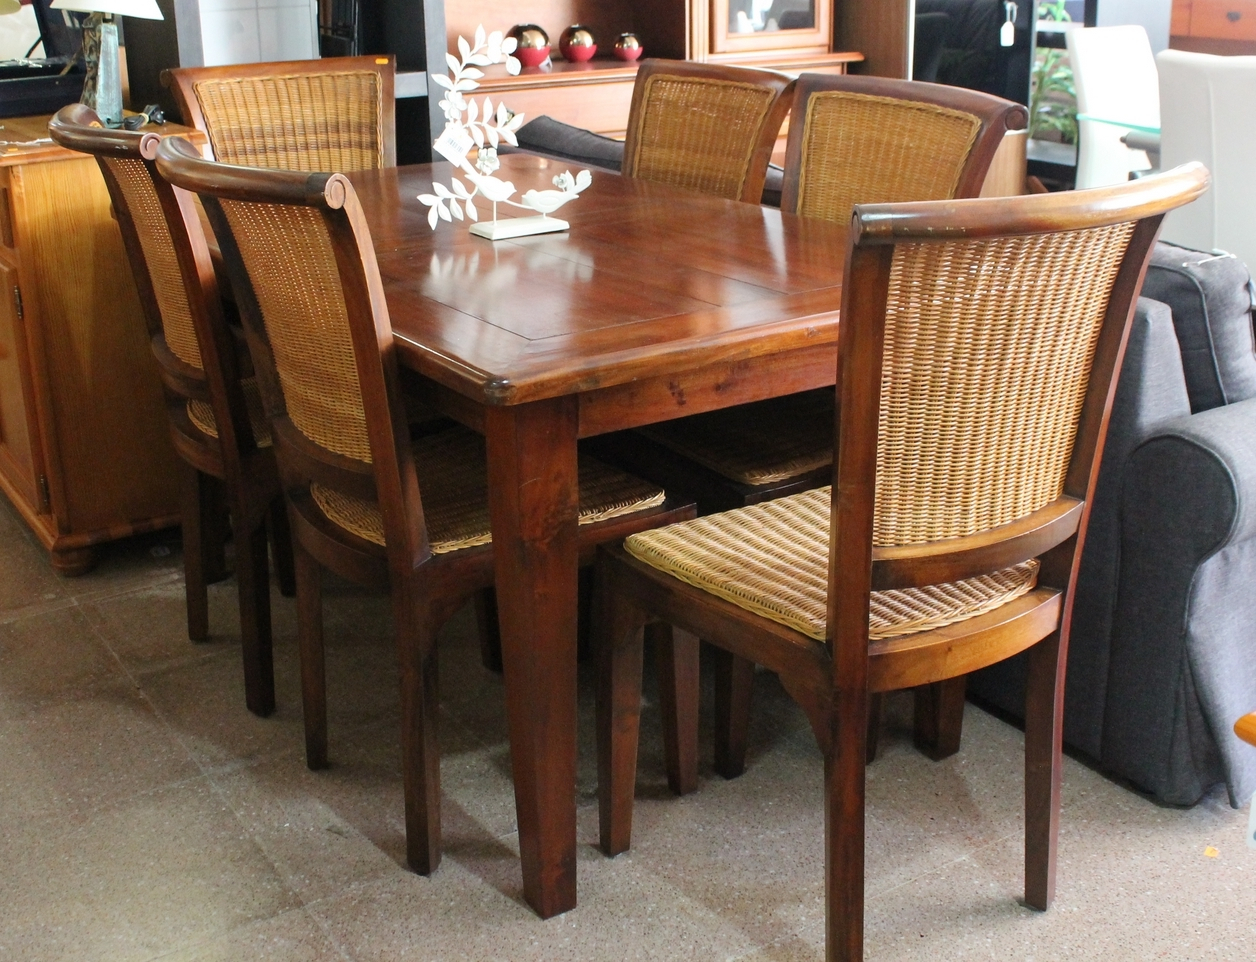 2nd Hand Dining Room Table And Chairs • Faucet Ideas Site